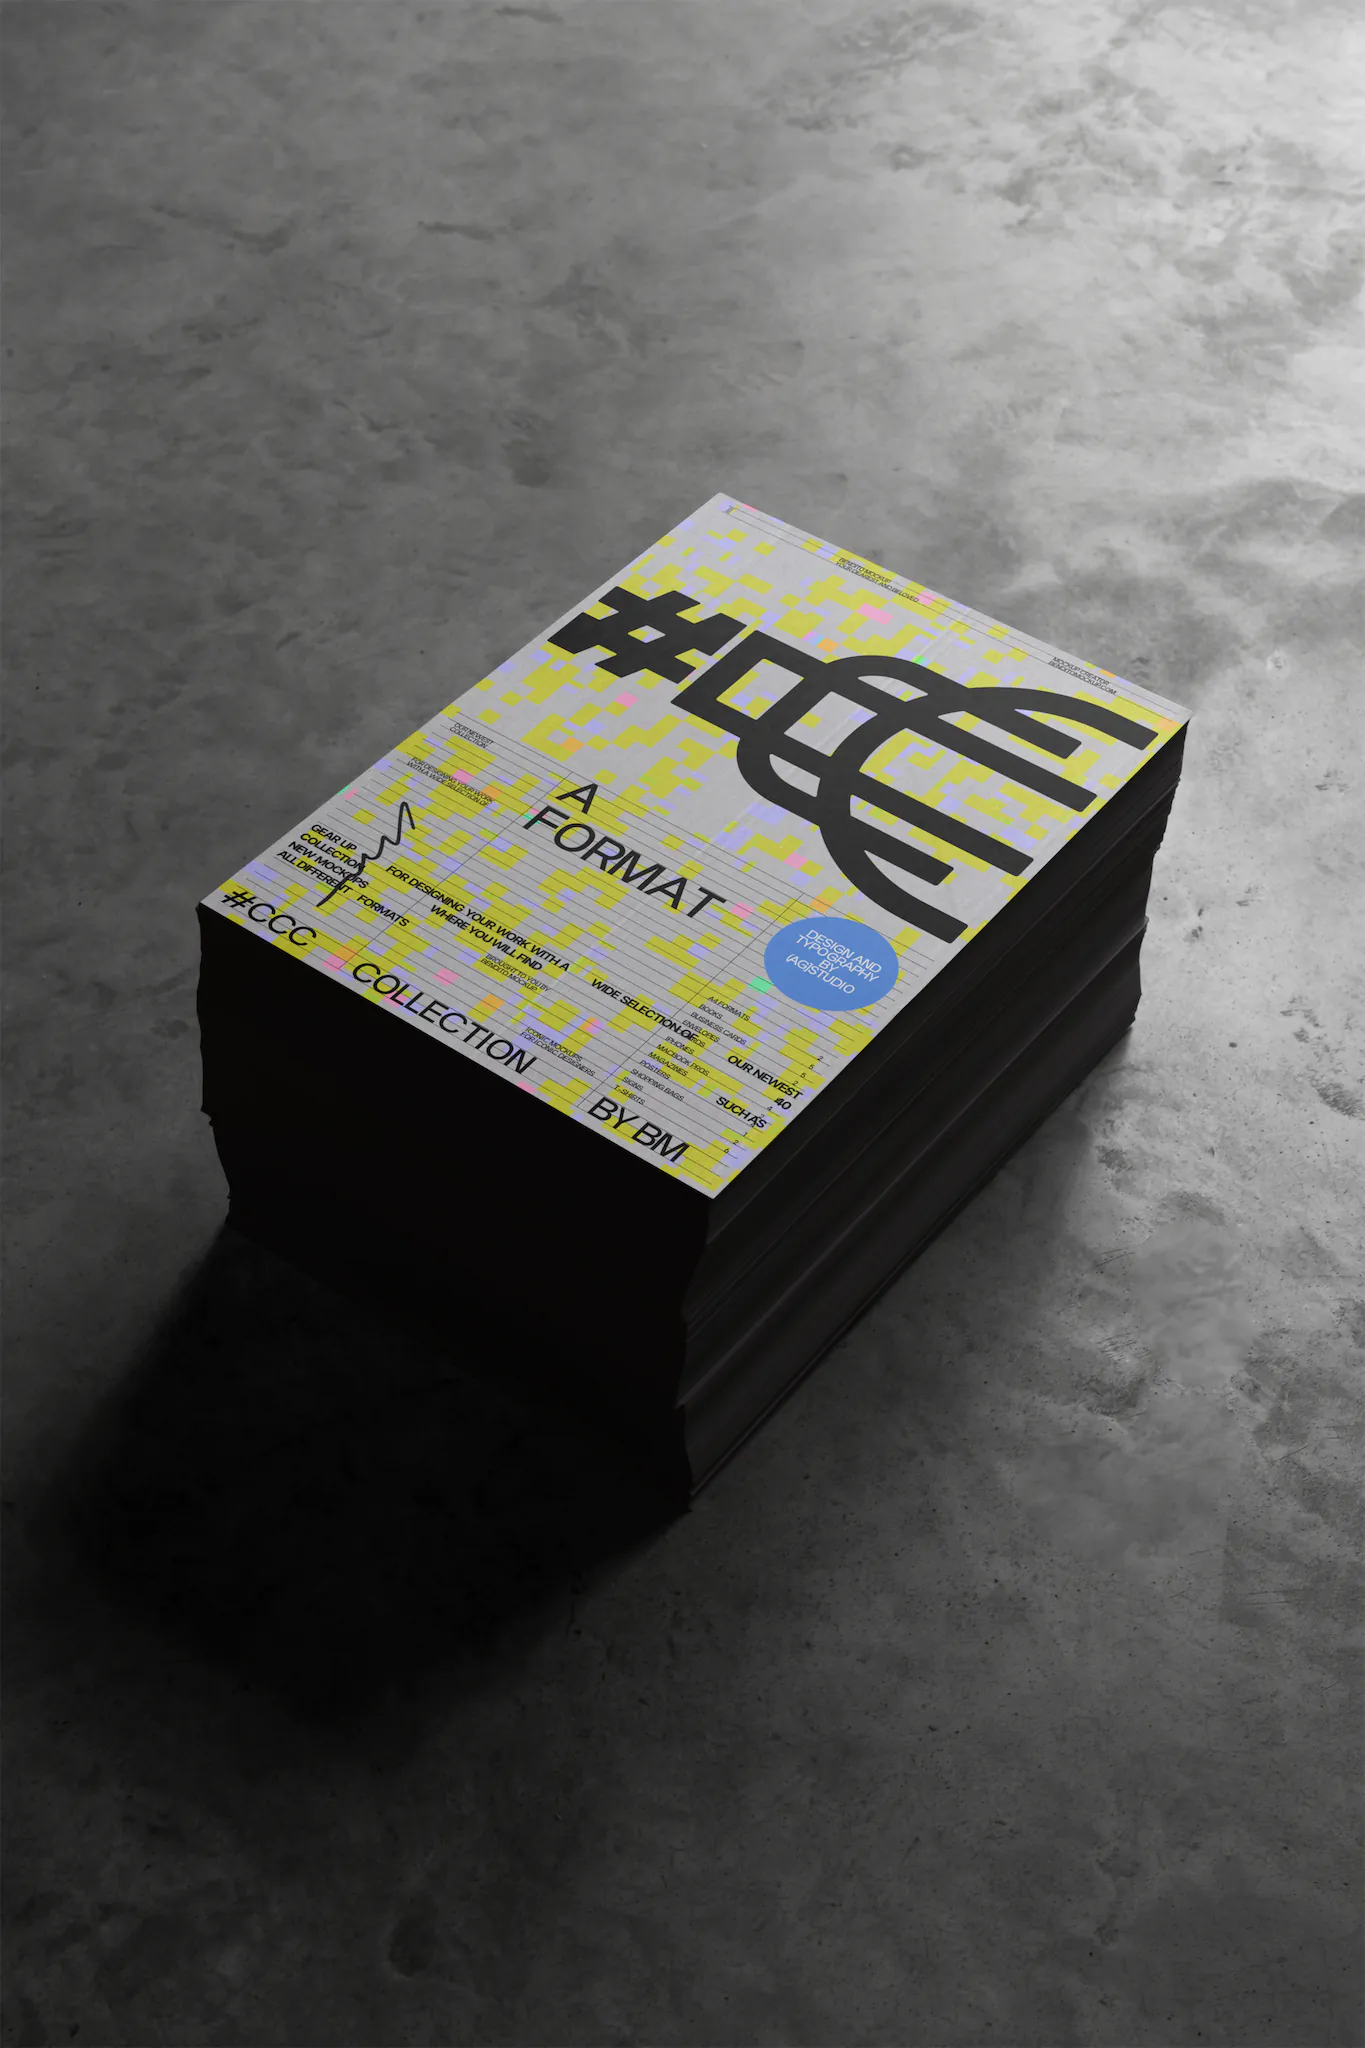 Block of A-Format mockup, resting on a concrete floor in an industrial space.